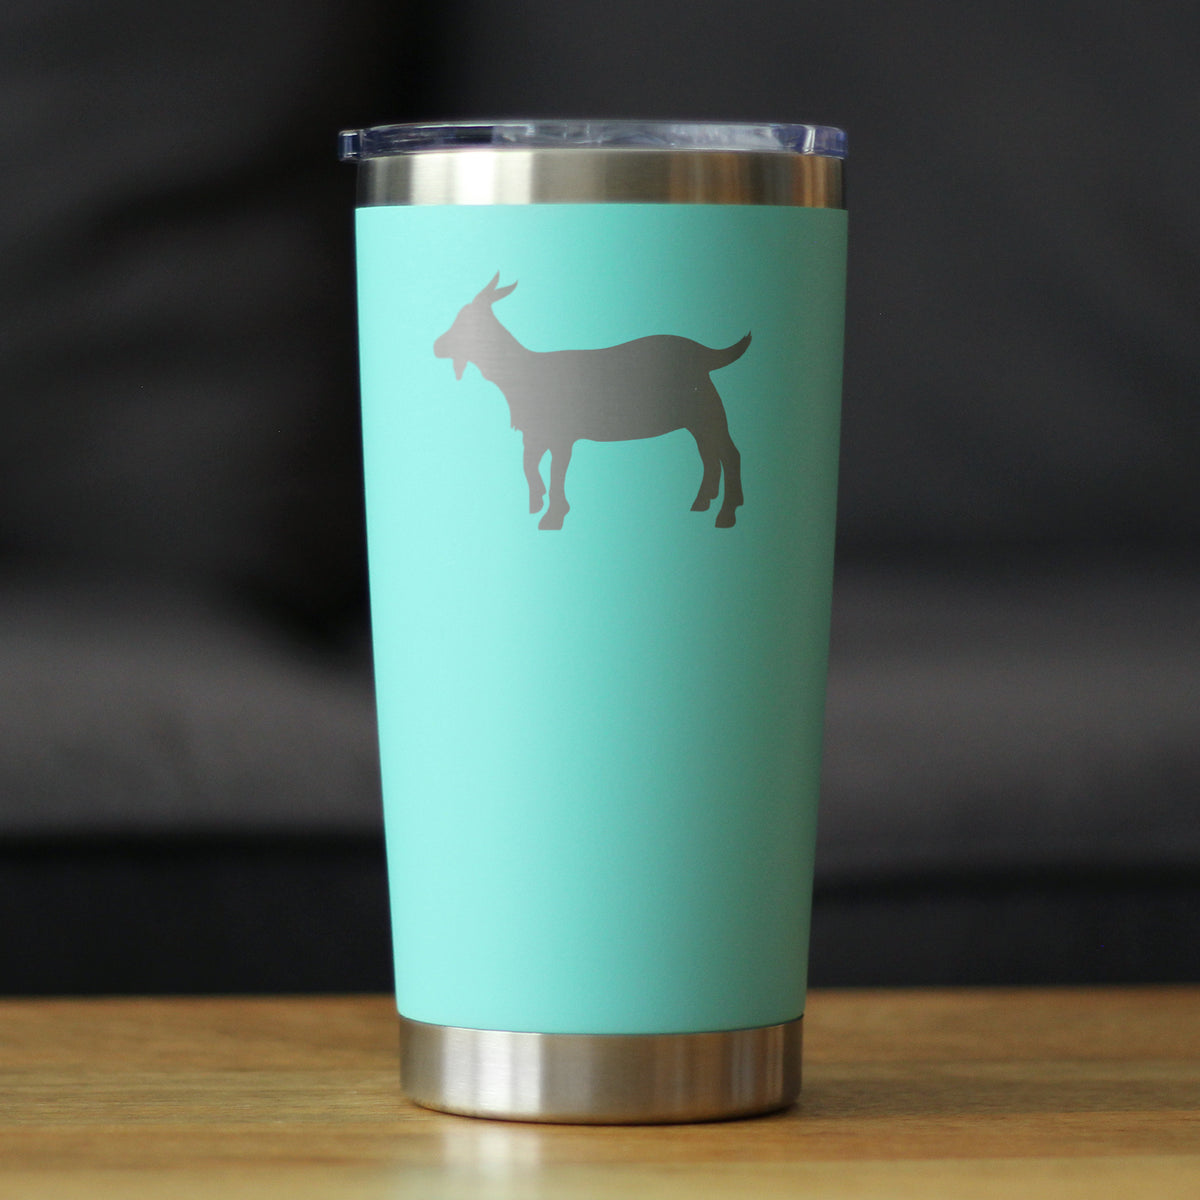 Goat Silhouette - Insulated Coffee Tumbler Cup with Sliding Lid - Stainless Steel Travel Mug - Goat Gifts for Women and Men